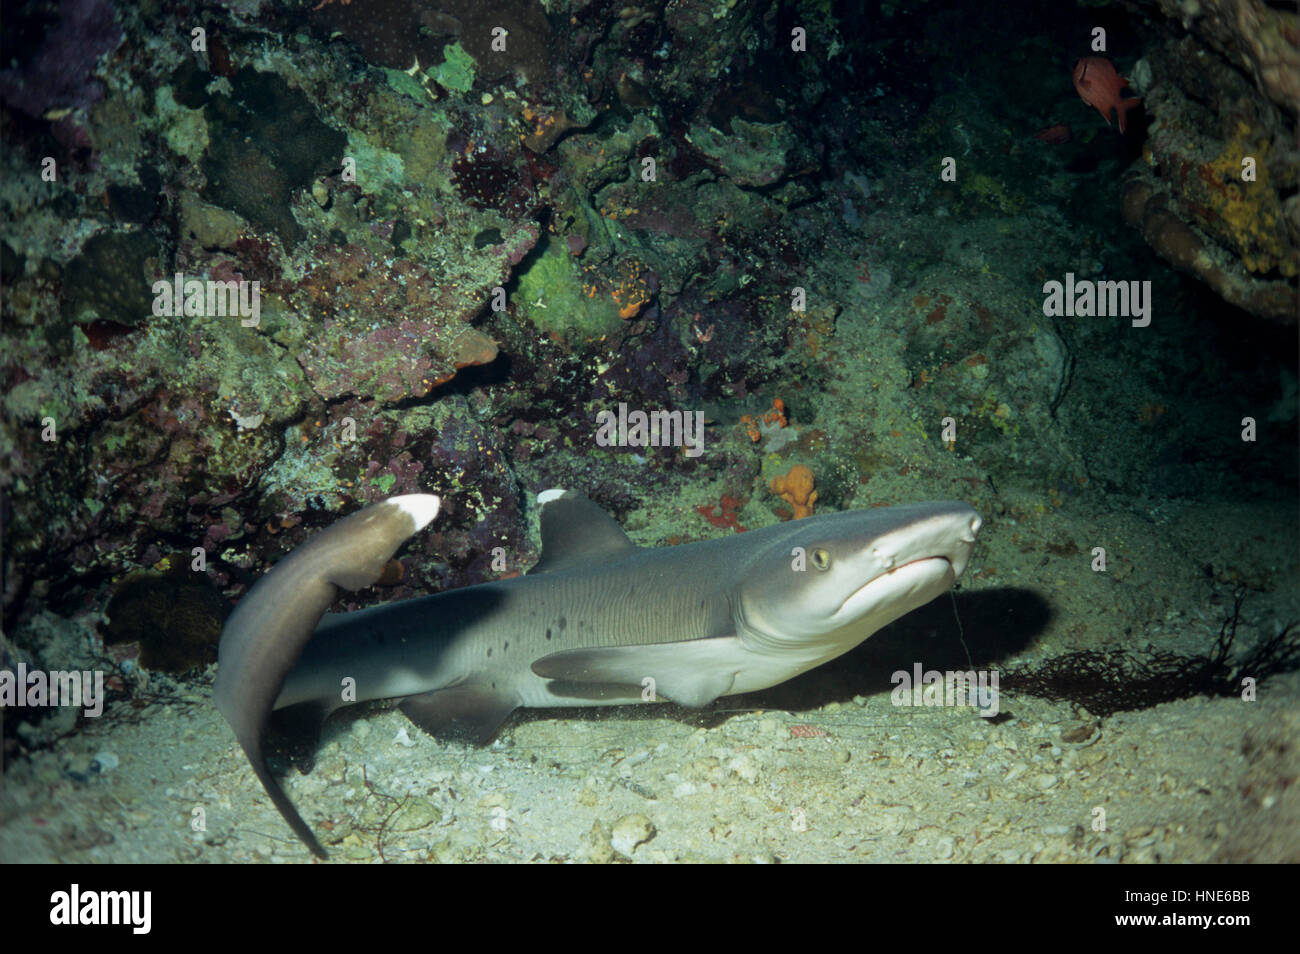 This white-tip shark (Triaenodon obesus) had broken free from a fishing line, which is visible in the picture. Photographed in the Egyptian Red Sea. Stock Photo